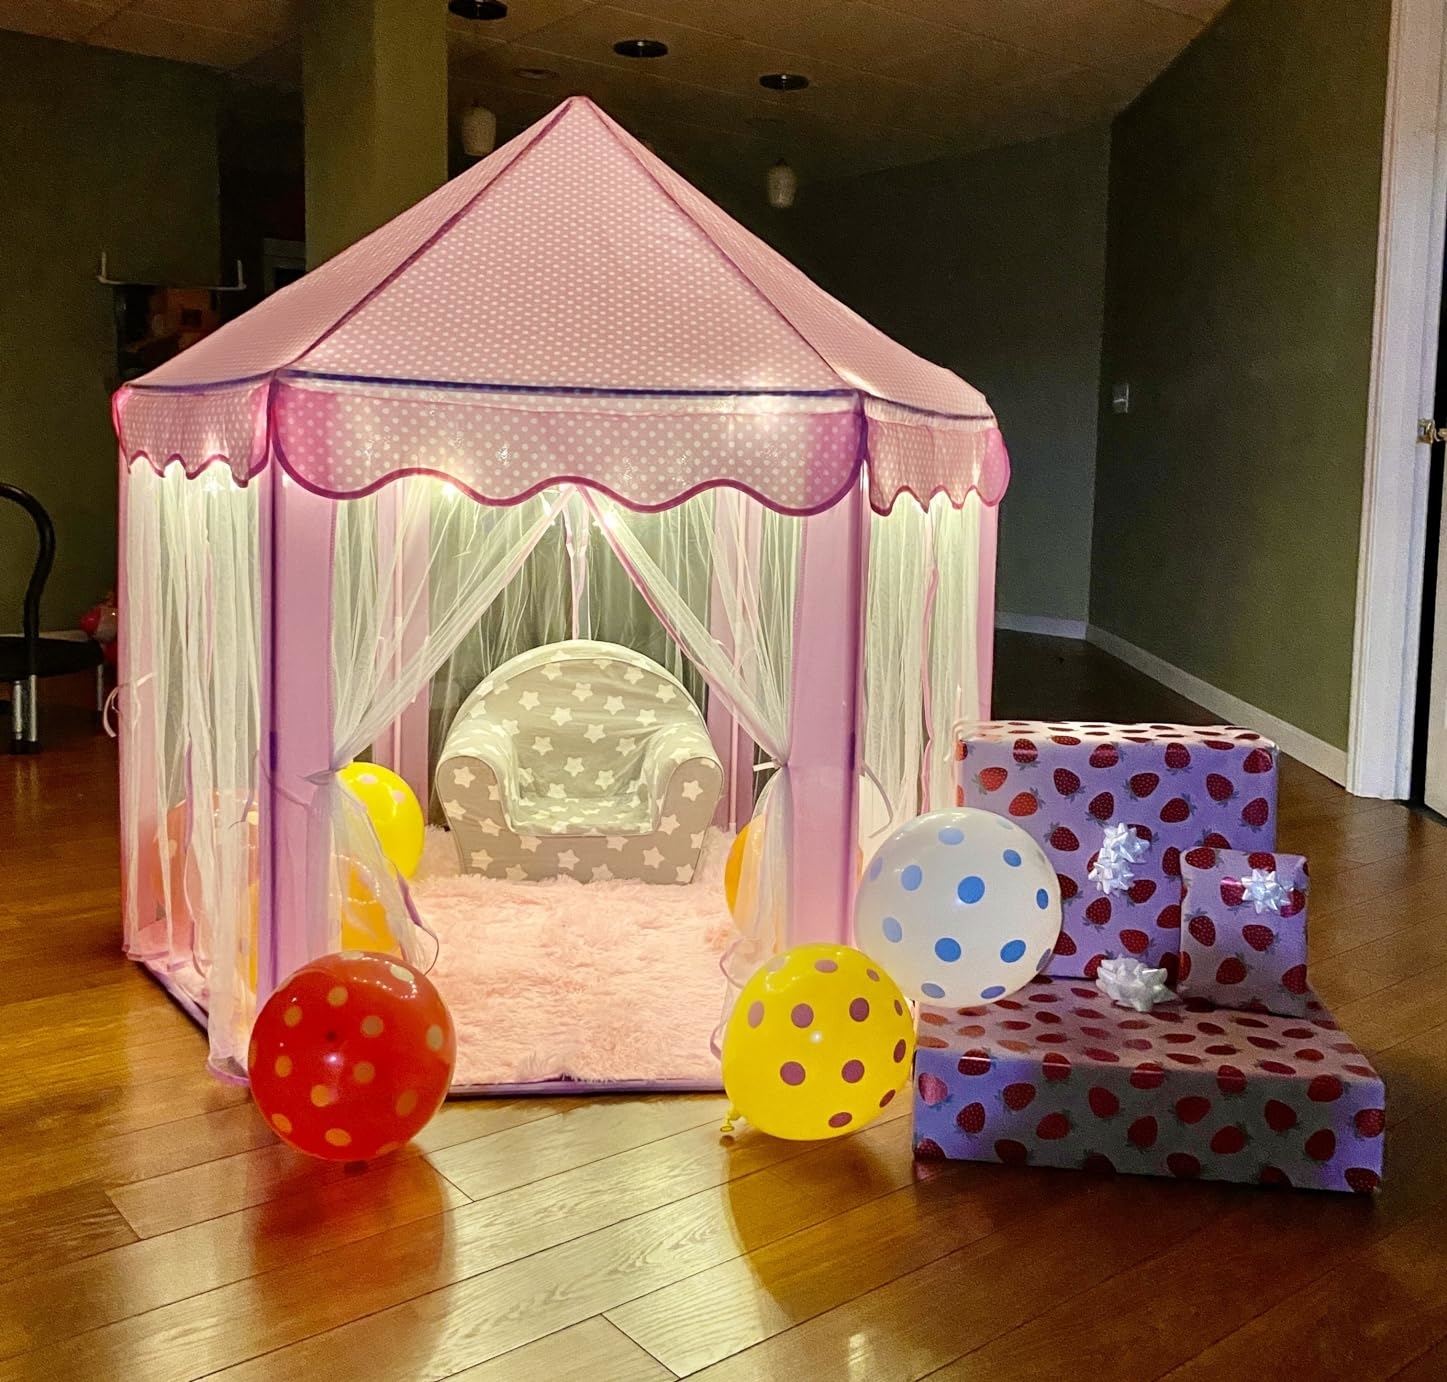 Child&#x27;s play tent set up indoors with patterned pillows and colorful balloons around it